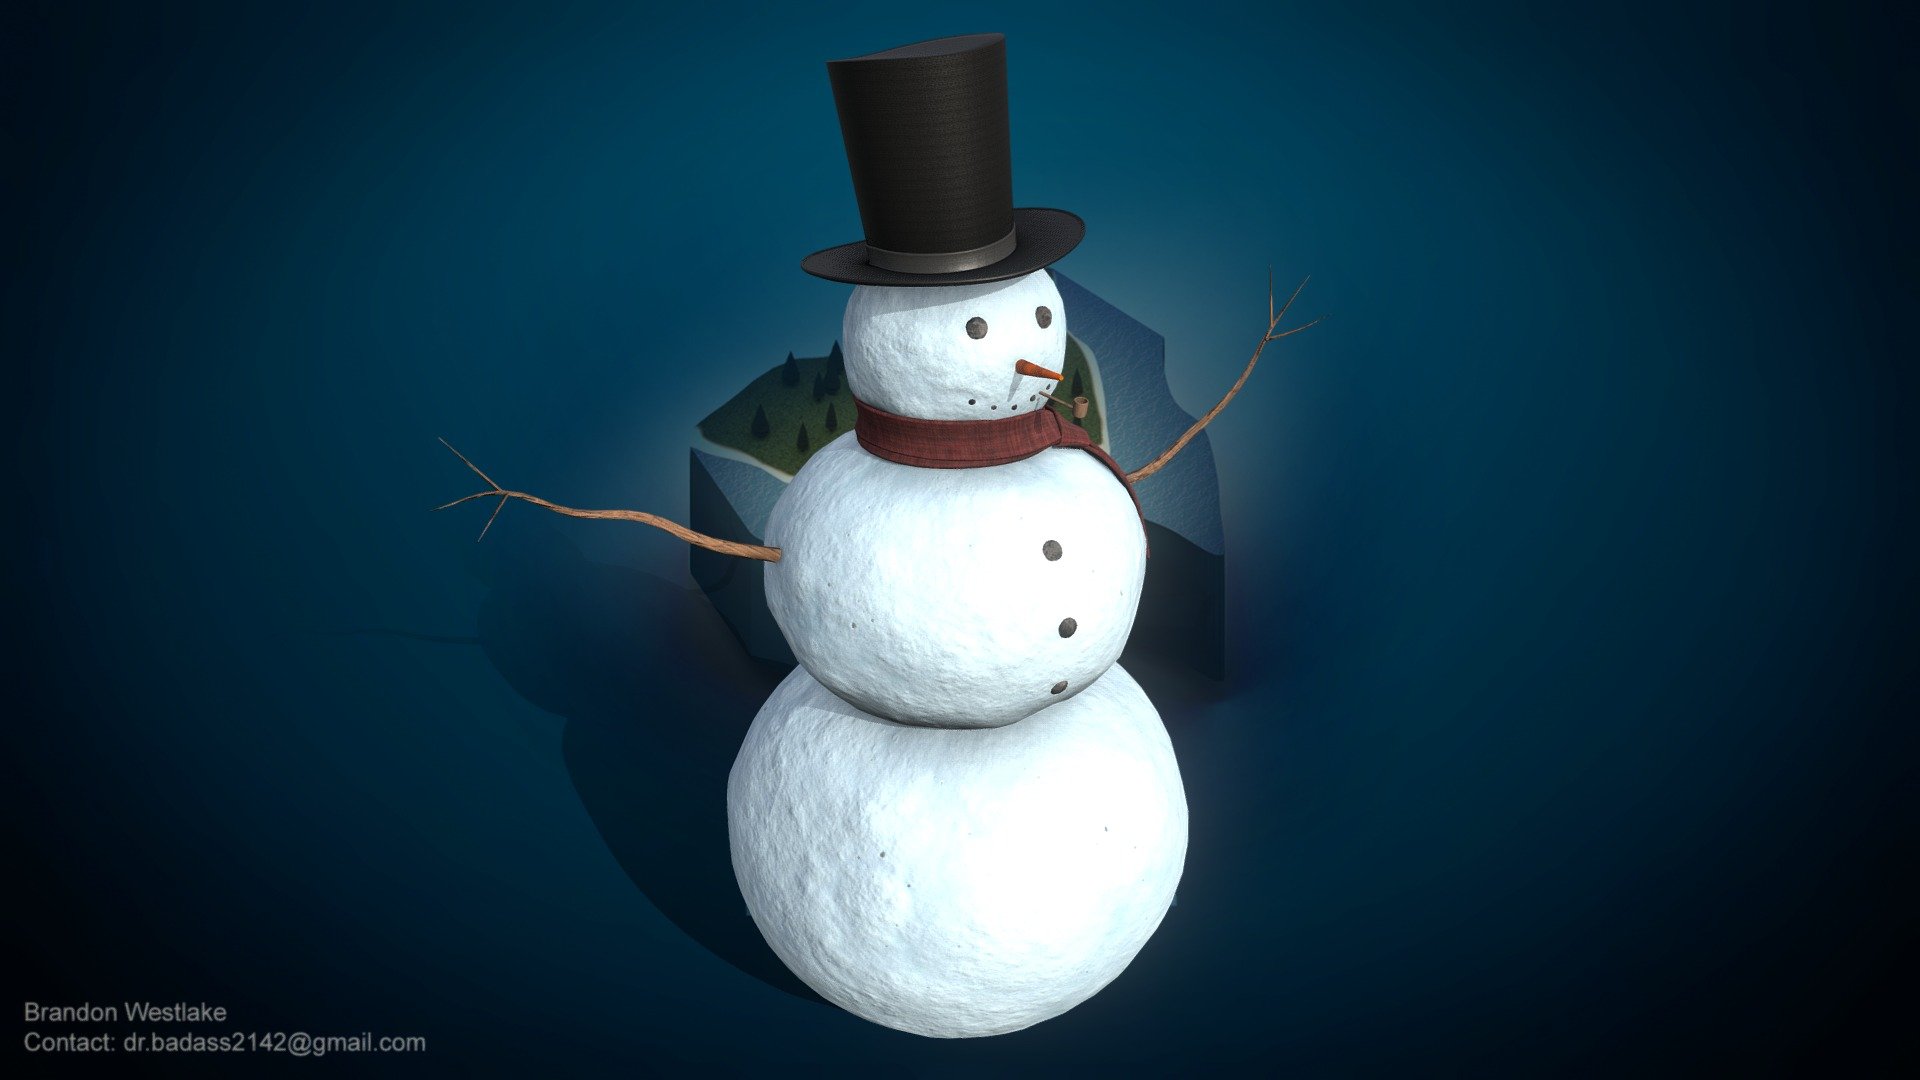 Snowman 13,657 polys, 13,510 verts Texel Density of 10.24px/cm @4096x4096 1 Material Sets Centimeter World Scale

File Includes: FBX OBJ DAE Blend PNG Textures TIFF Textures

Modeled With Blender 2.79 Textured and Rendered With Substance 2018.1.3

Please contact me if you have any questions or business inquiries: bsw2142@gmail.com

You Can Also Get A Quote From Me Via Questioneer! Google Forms - Snowman - Buy Royalty Free 3D model by Brandon Westlake (@dr.badass2142) 3d model